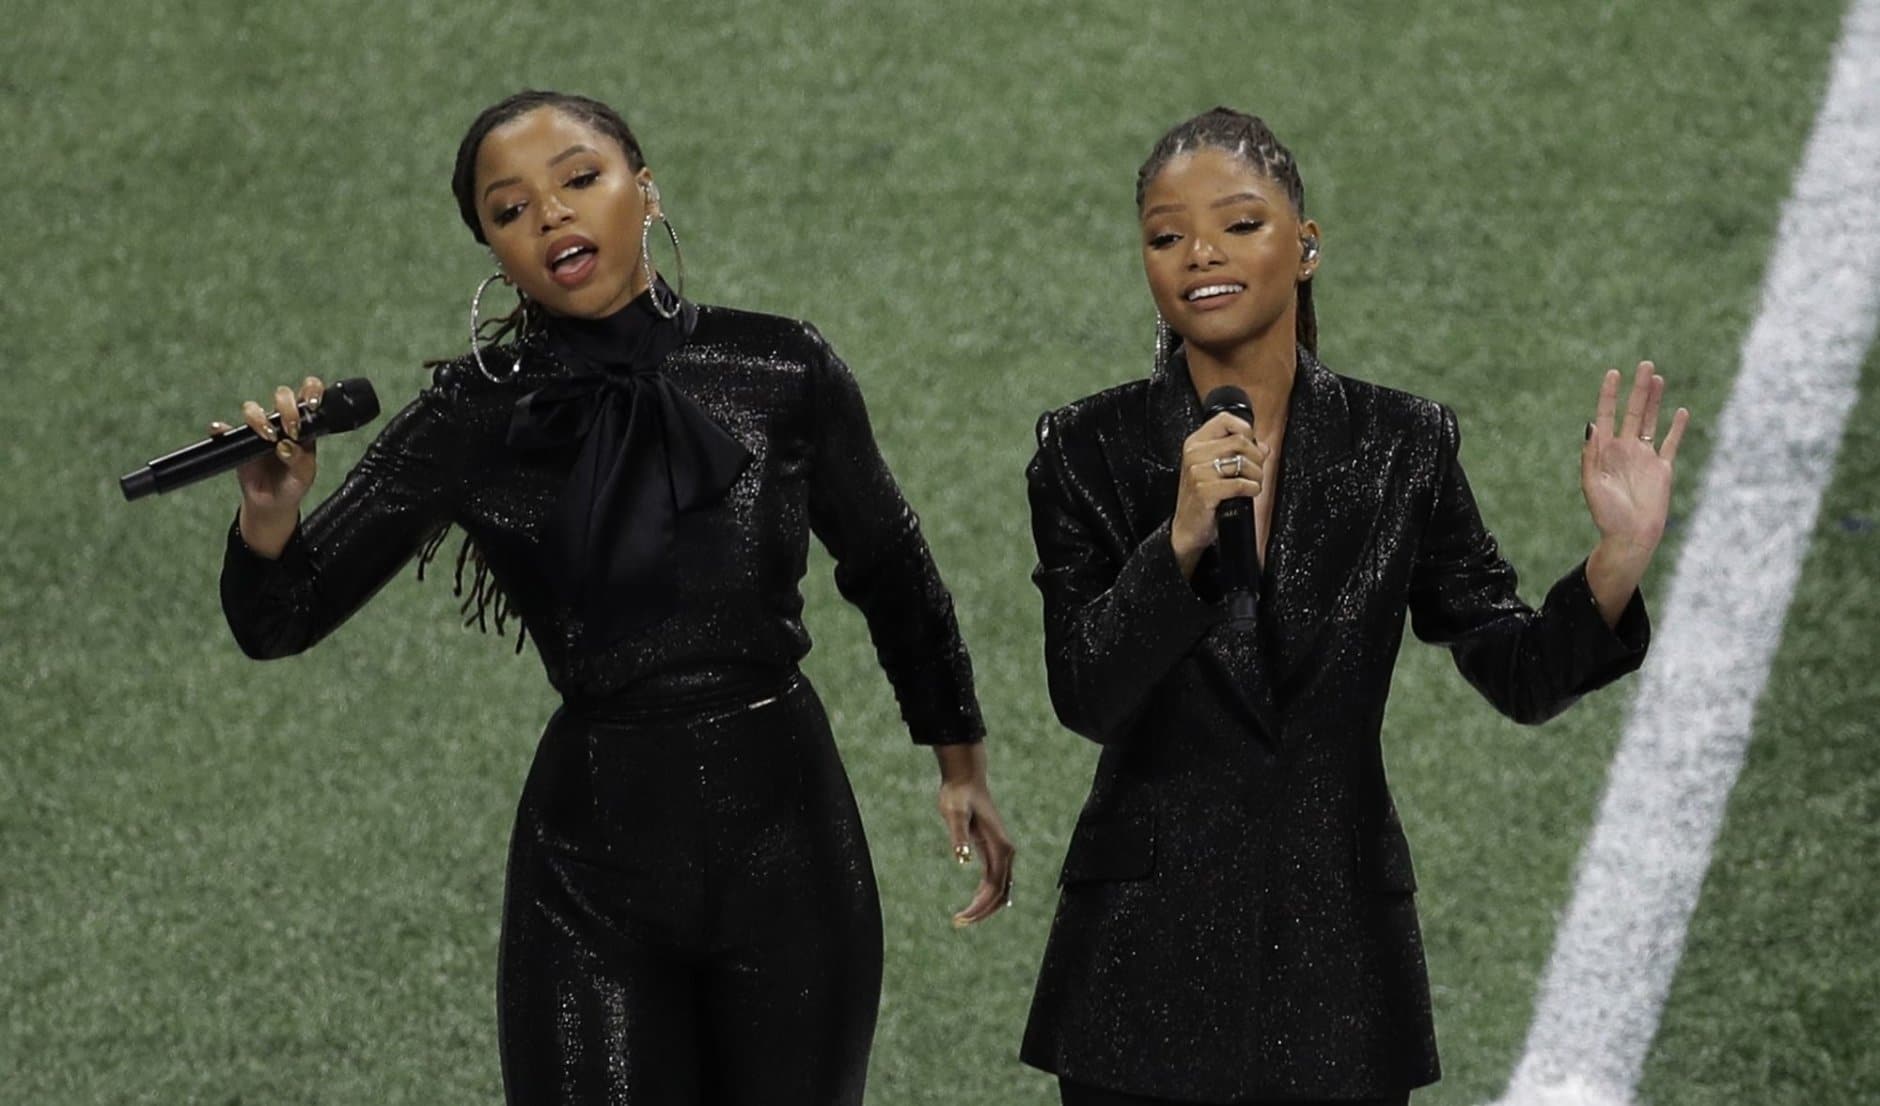 Chloe x Halle perform before the NFL Super Bowl 53 football game between the Los Angeles Rams and the New England Patriots Sunday, Feb. 3, 2019, in Atlanta. (AP Photo/Charlie Riedel)